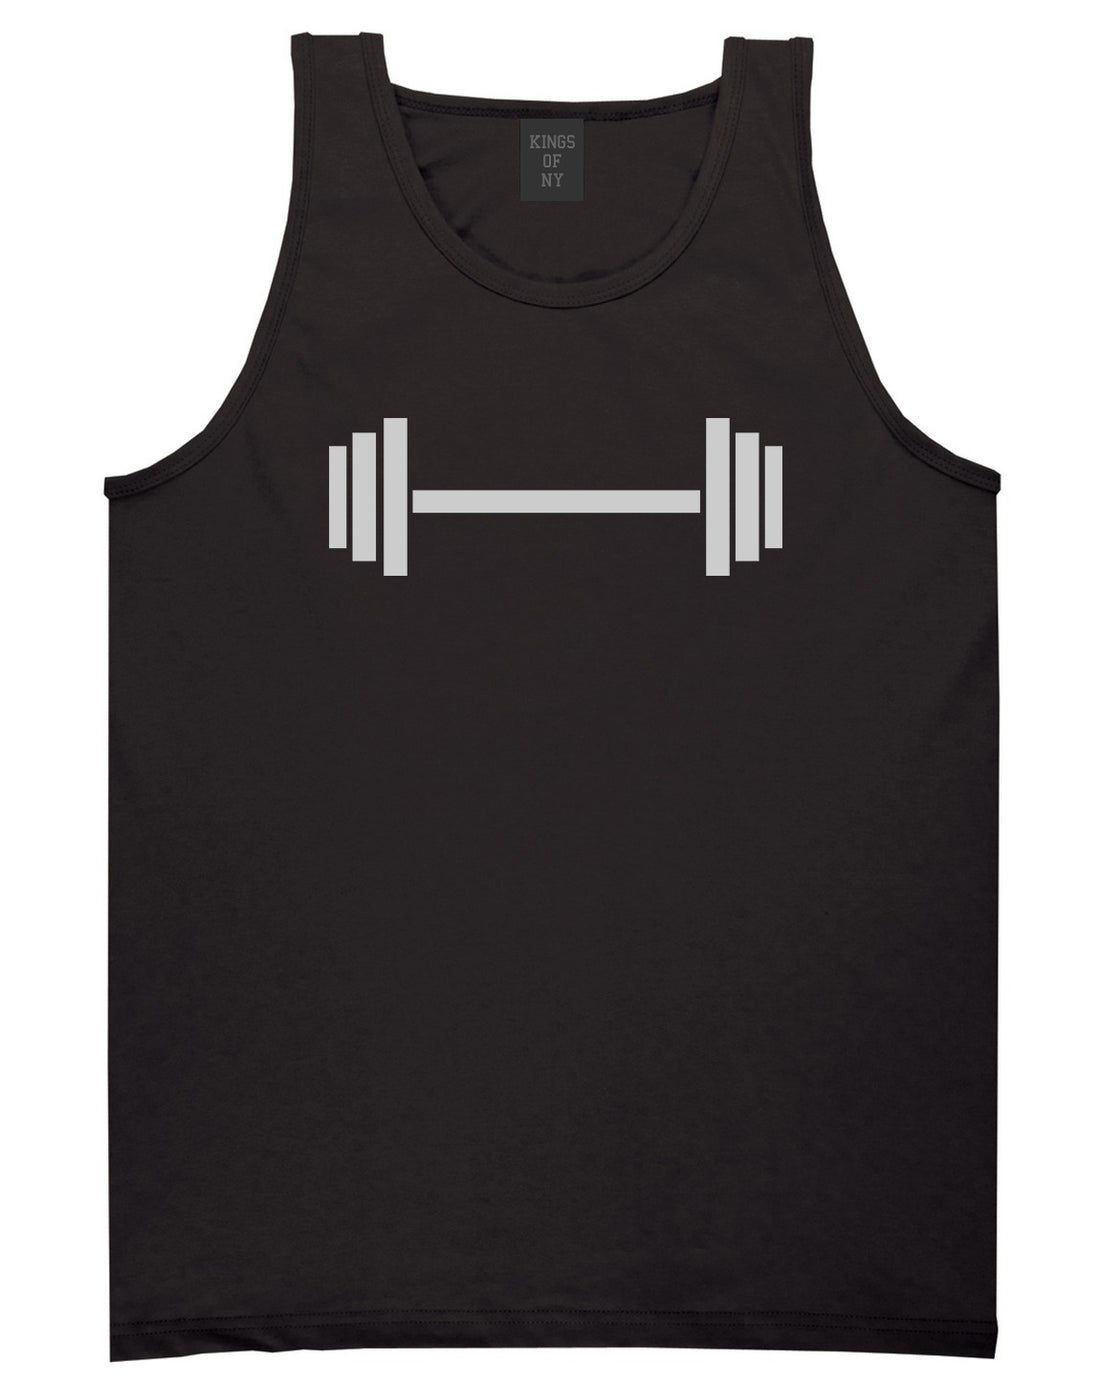 Barbell Workout Gym Black Tank Top Shirt by Kings Of NY